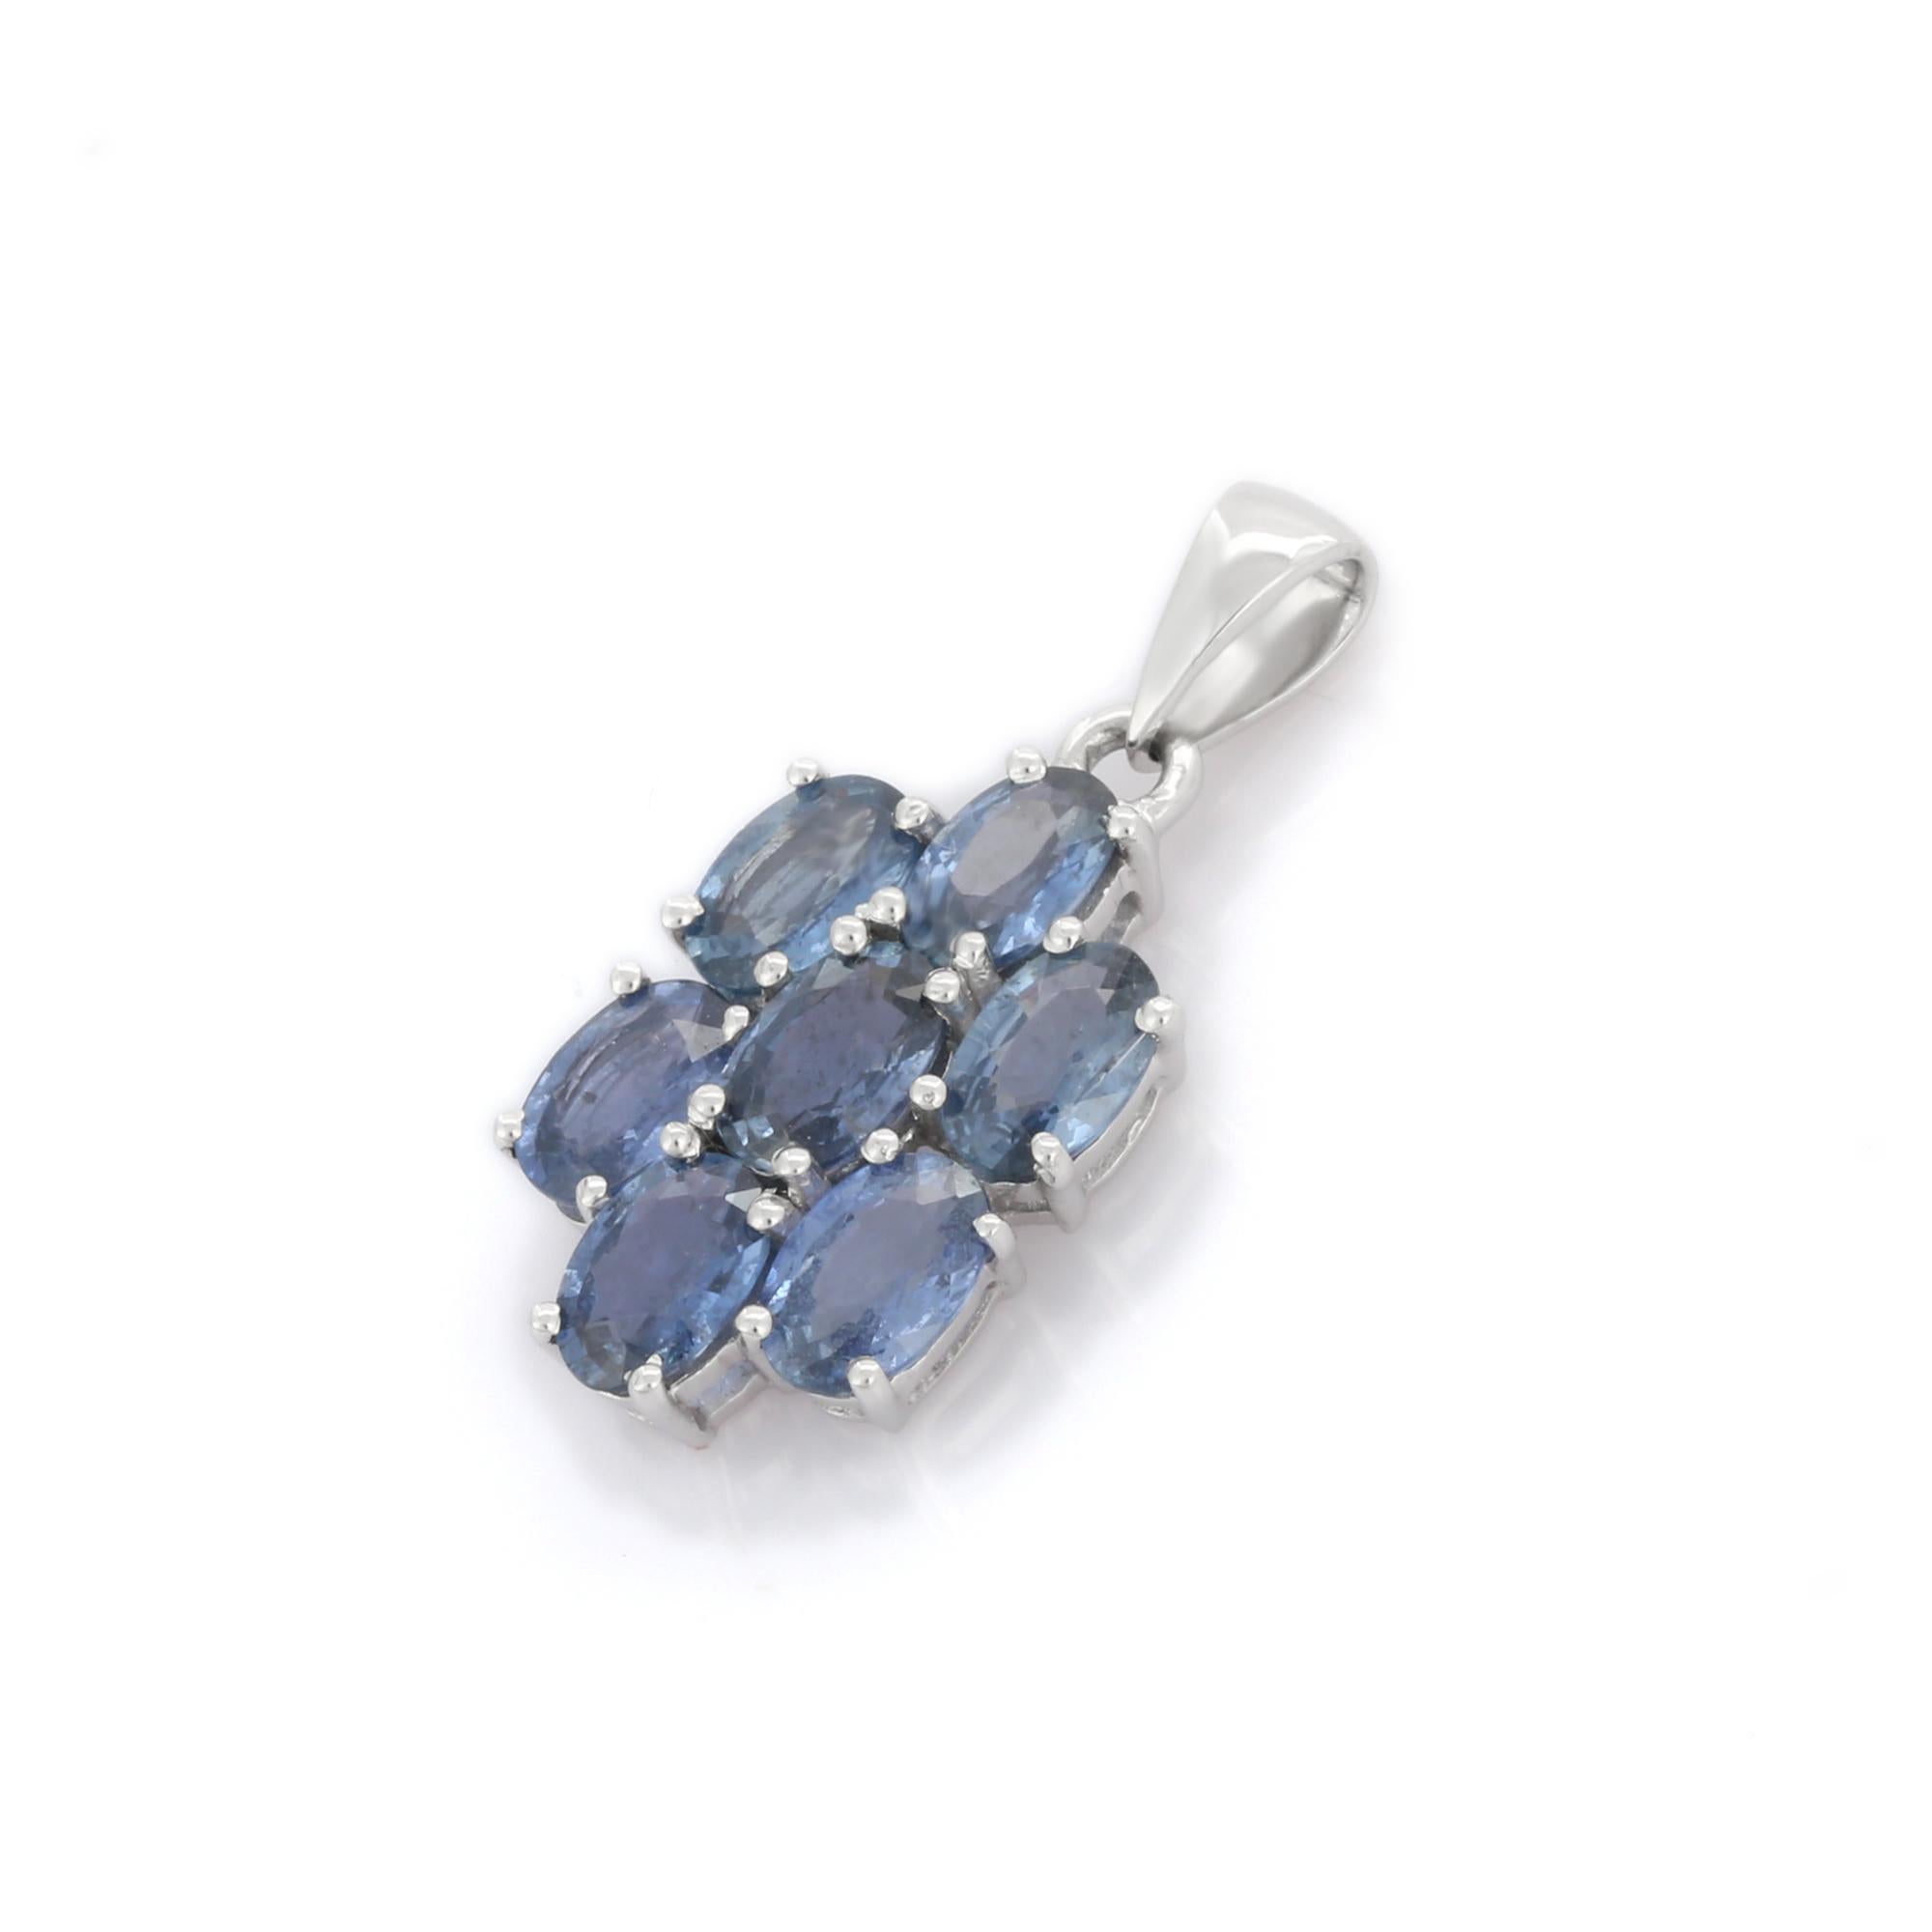 4.09 ct Blue Sapphire Flower Pendant, 14K White Gold Pendant Gift For Her In New Condition For Sale In Houston, TX